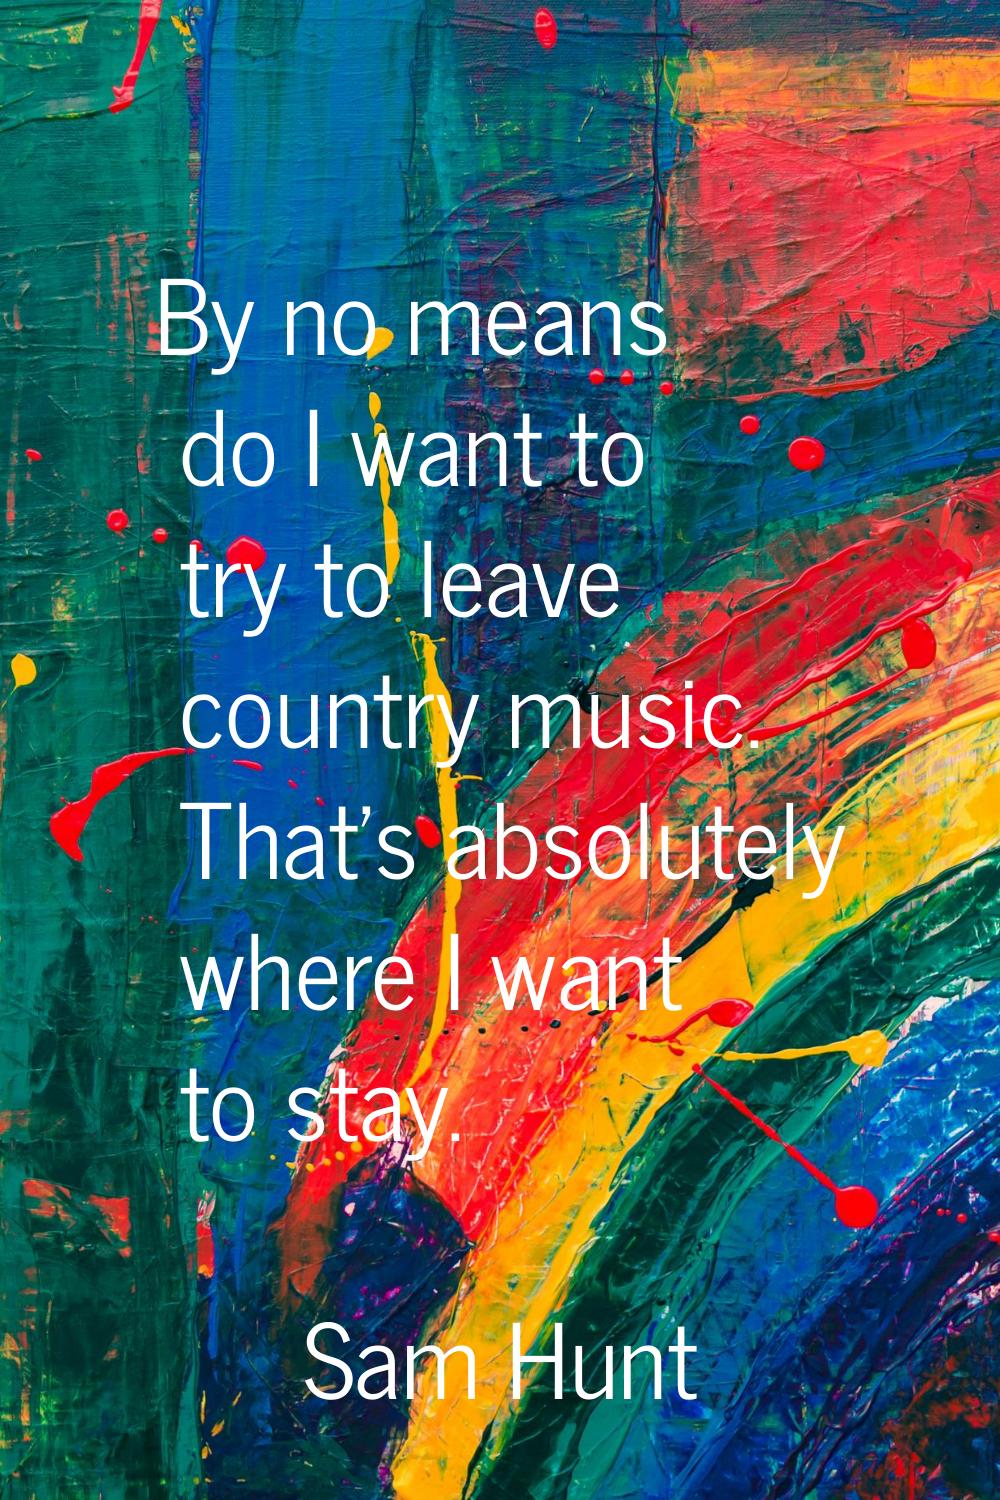 By no means do I want to try to leave country music. That's absolutely where I want to stay.